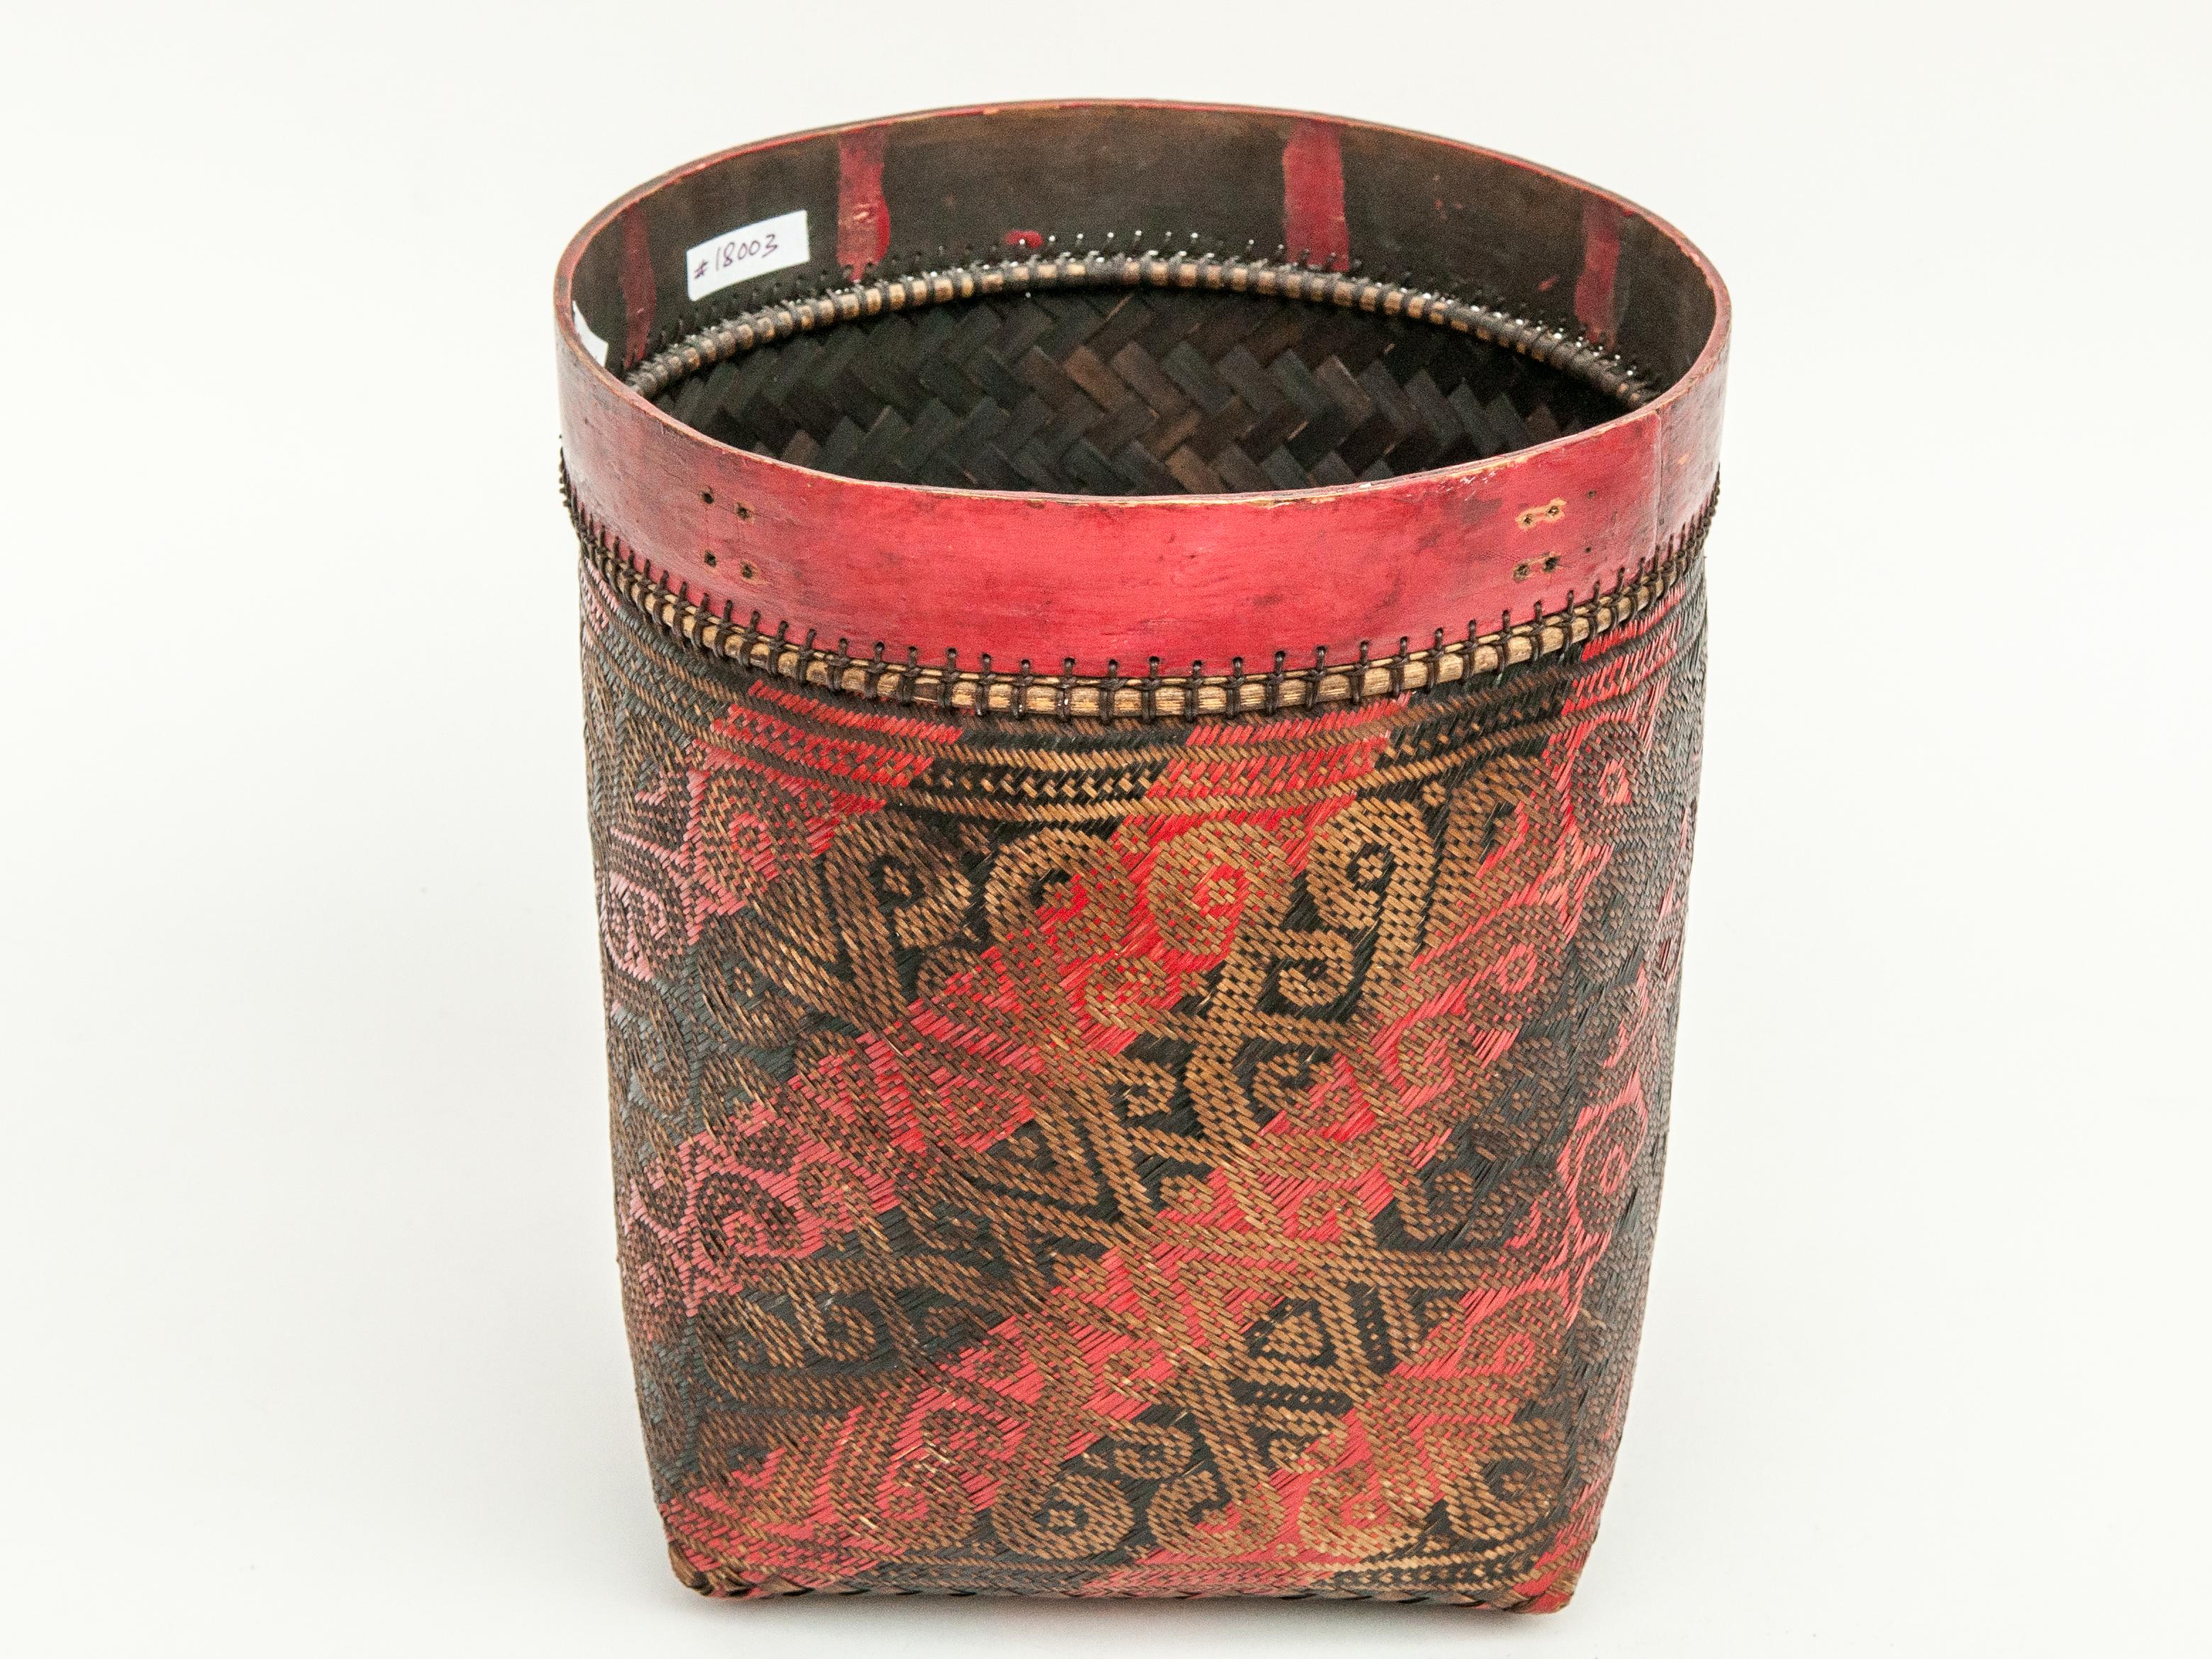 Hand-Crafted Vintage Seed Basket, with Woven Design, Iban of Borneo, Mid-Late 20th Century